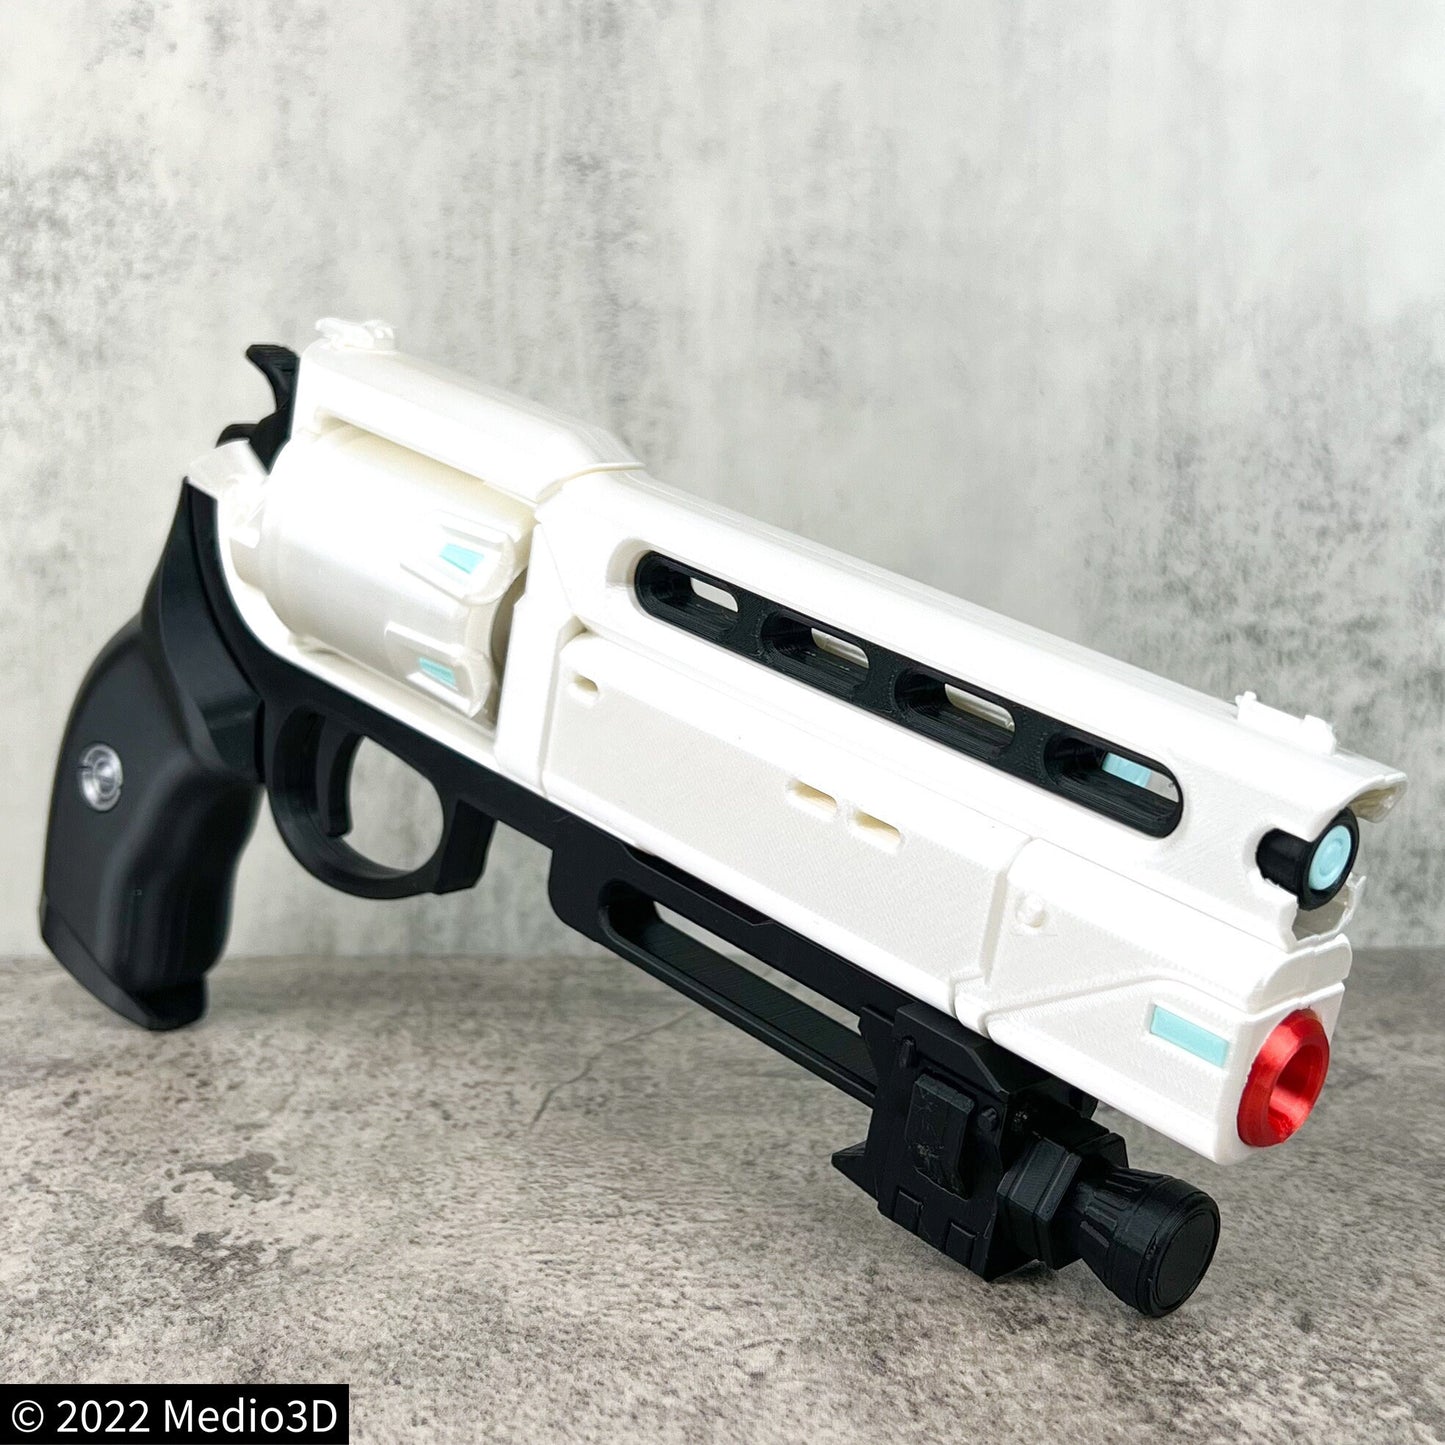 D2 Fatebringer ChatterWhite Hand Cannon, Props Cosplay, Larp Props, Post Apocalyptic Larp Weapon, Cyberpunk Prop